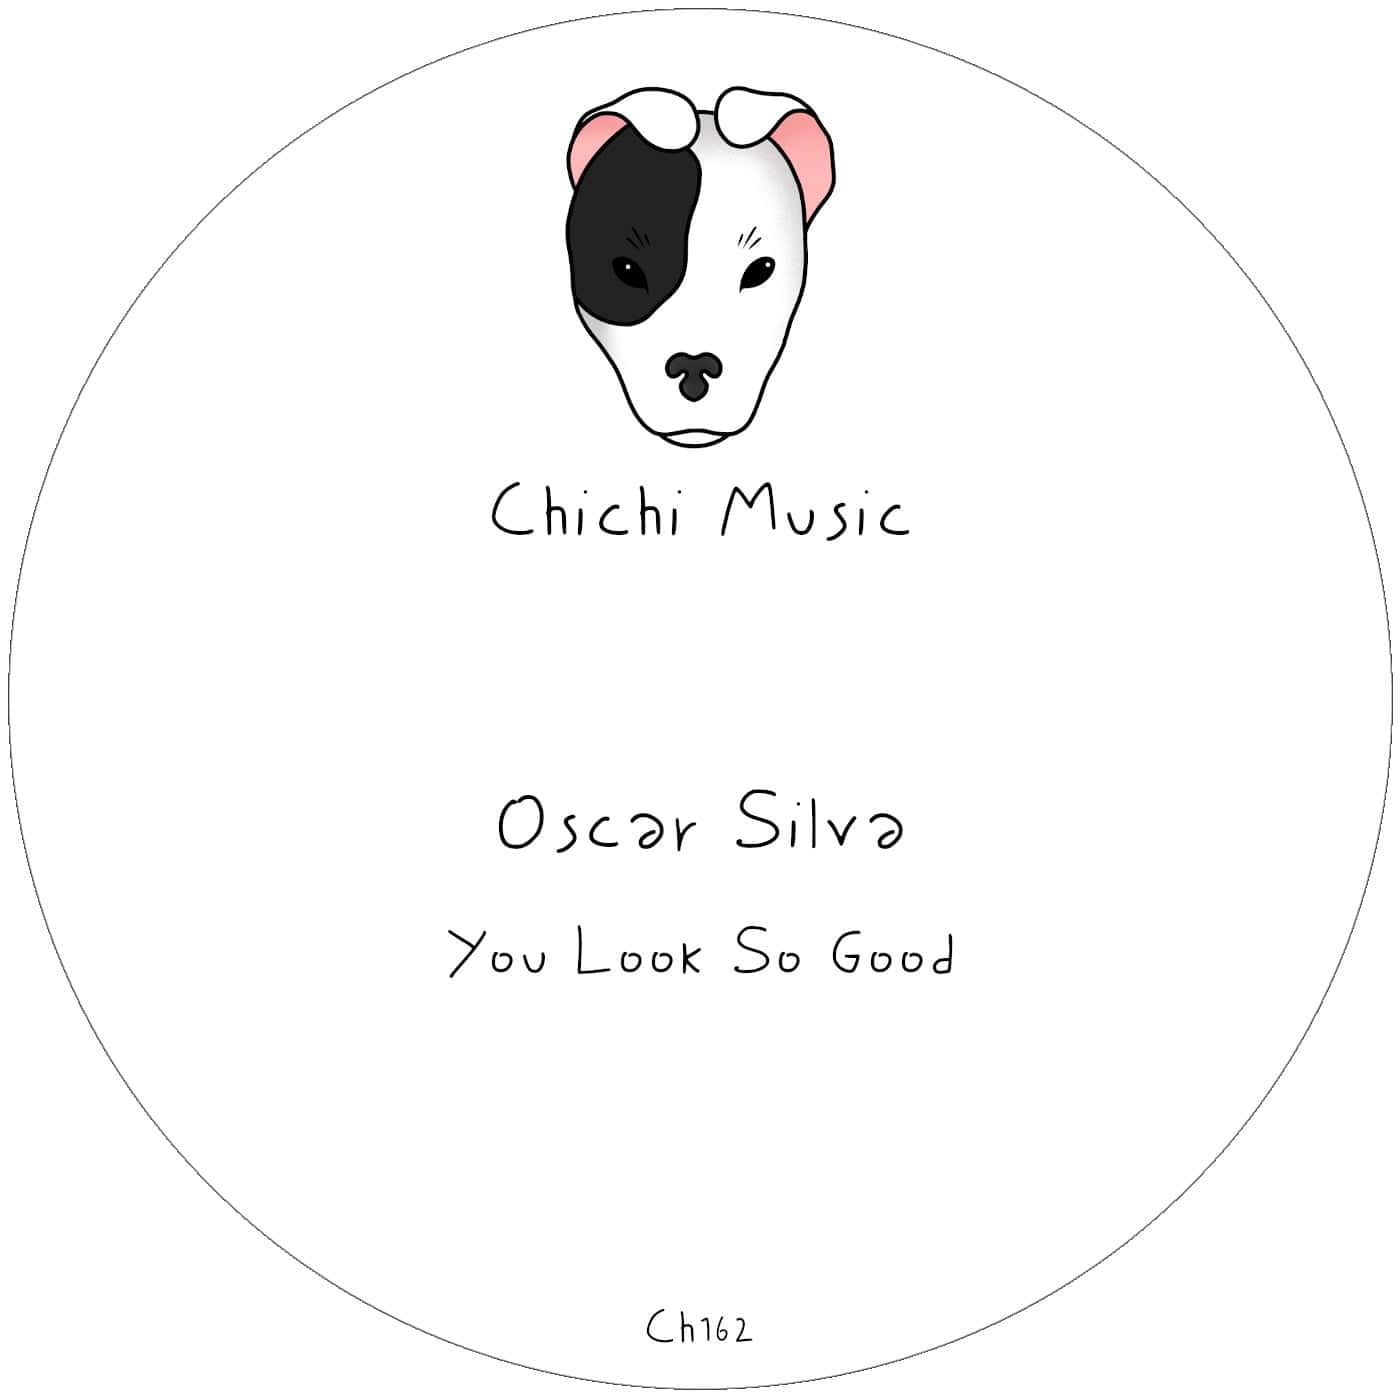 image cover: You Look So Good by Oscar Silva on Chichi Music